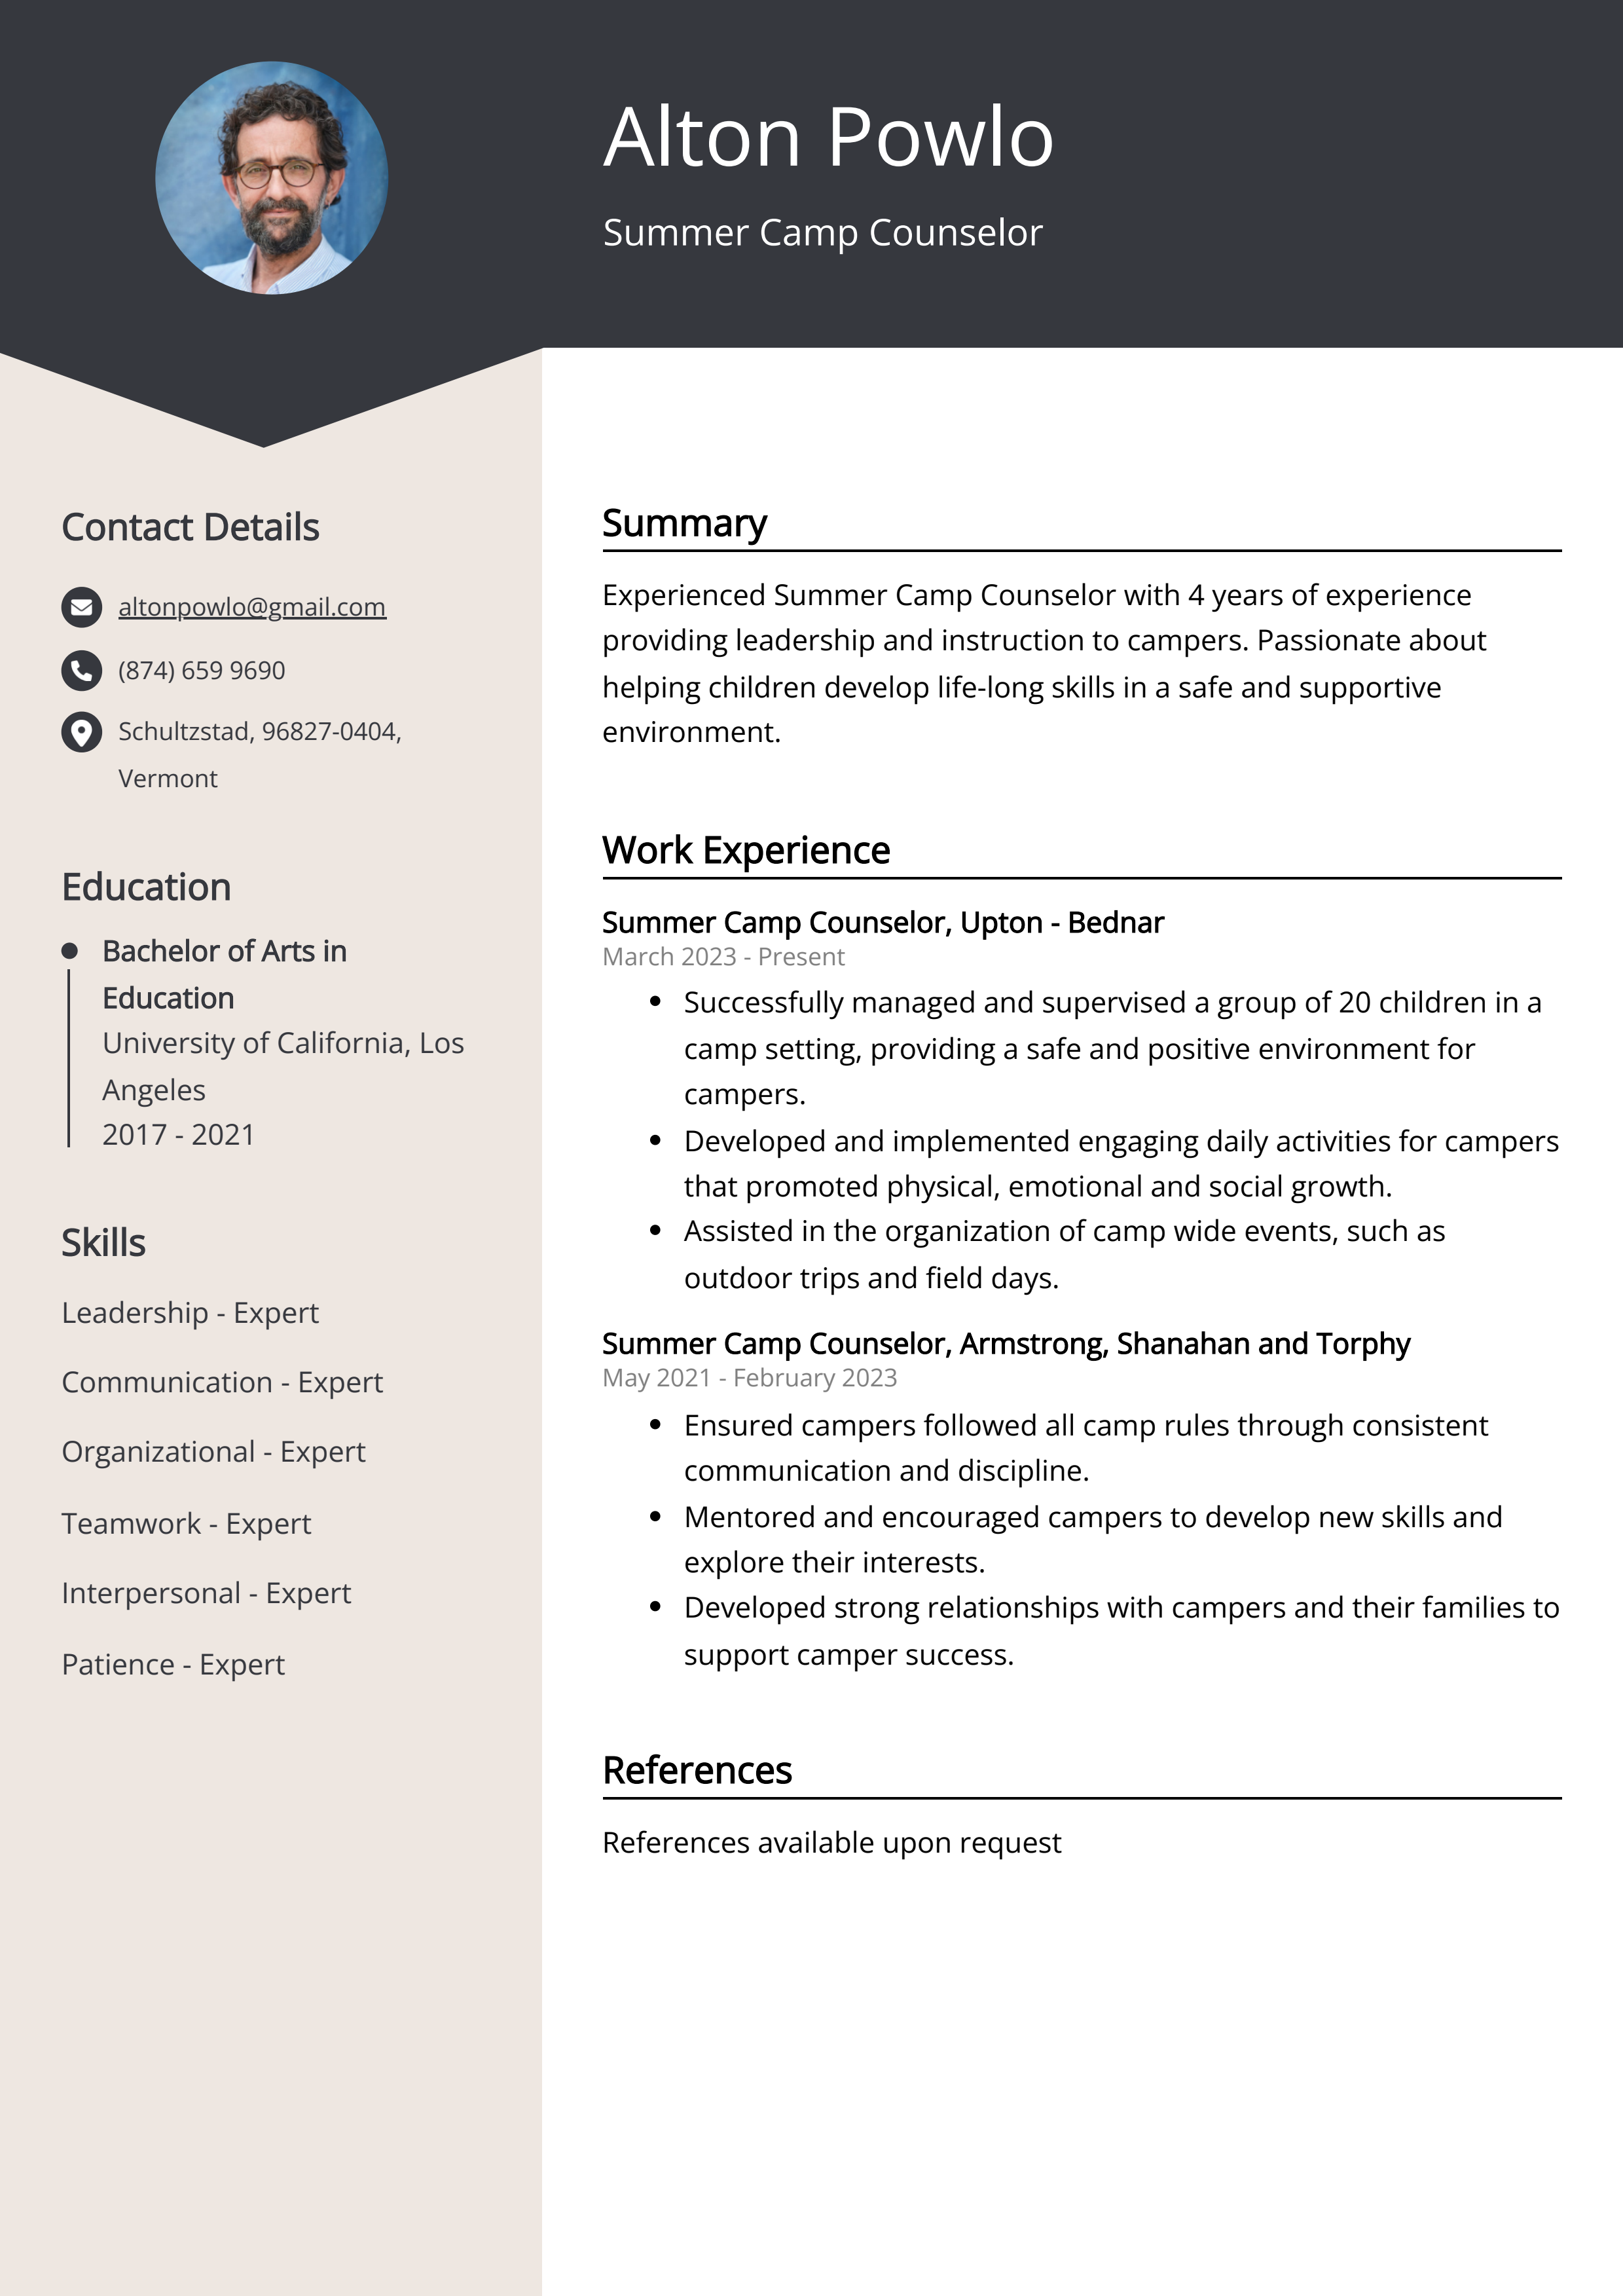 Summer Camp Counselor CV Example